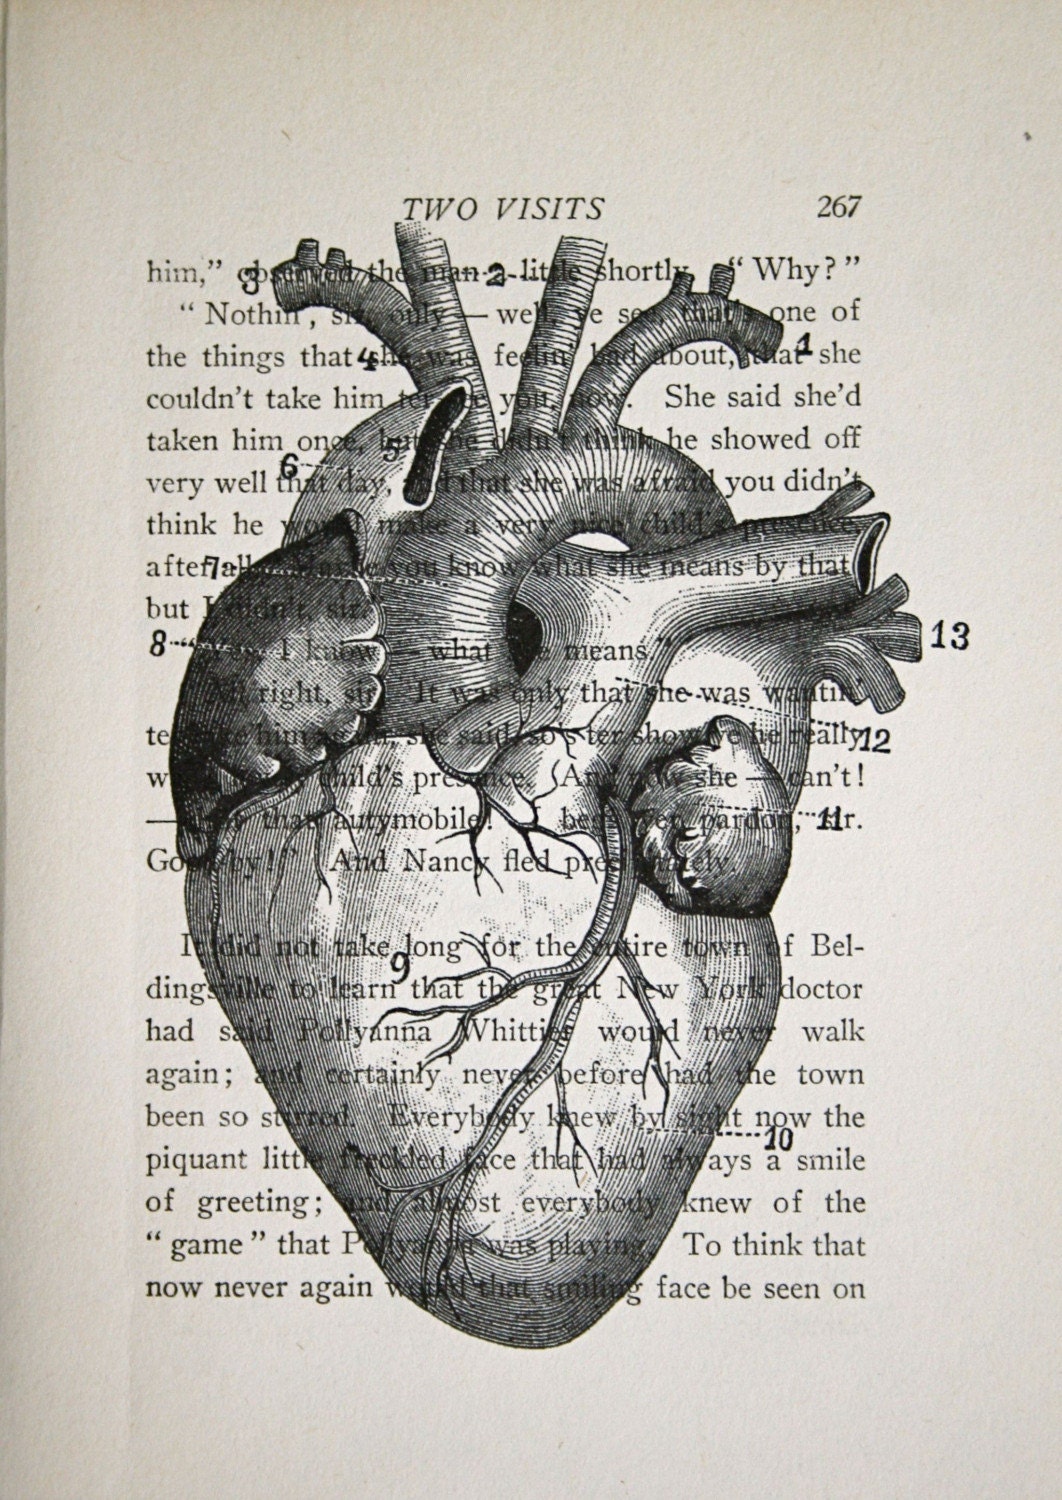 Anatomical Heart on Vintage Text - 5 x 7